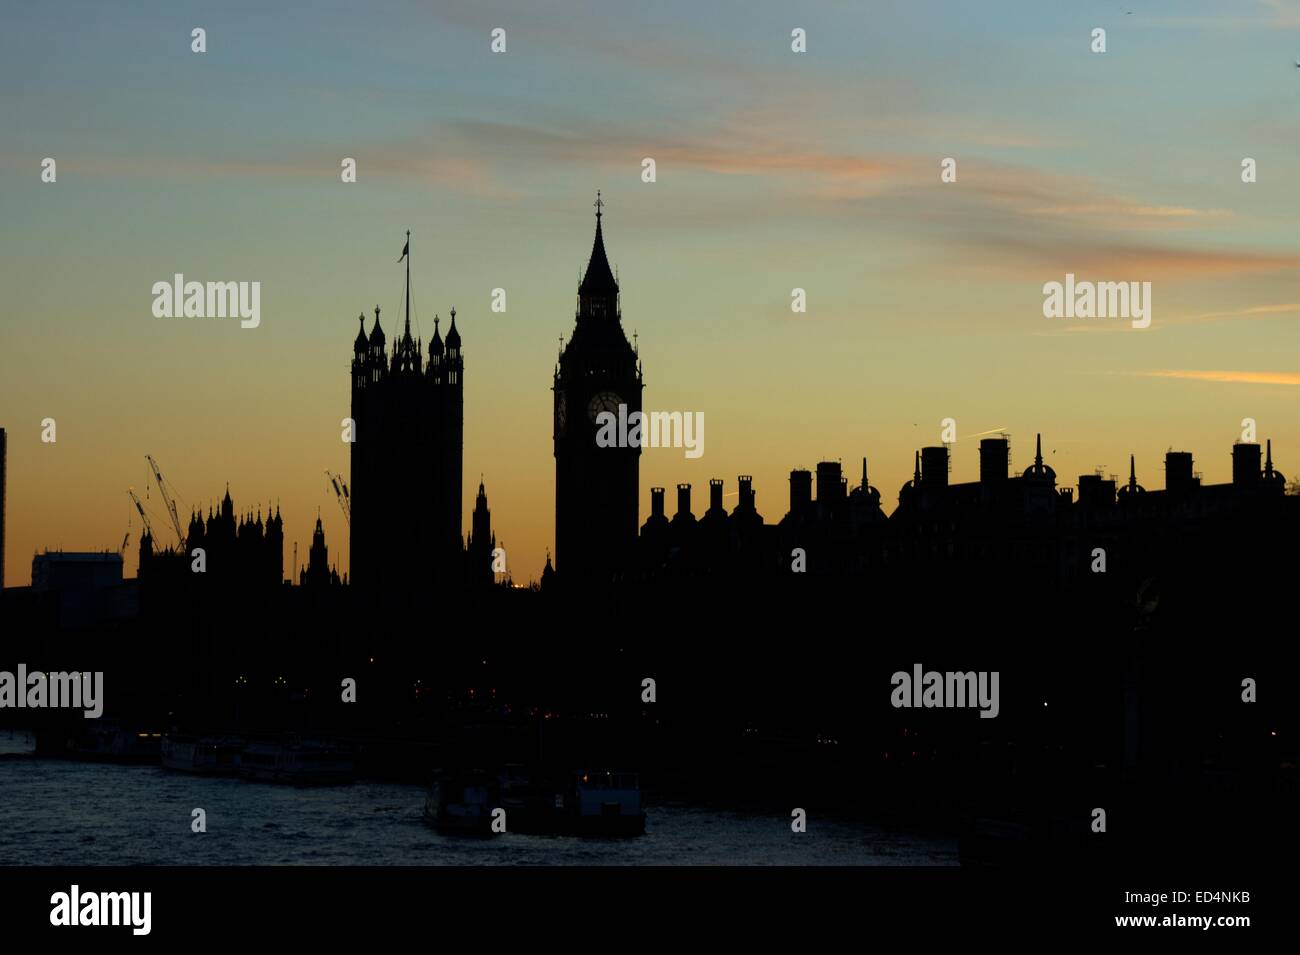 Houses of Parliament building at dusk   London sunset Stock Photo